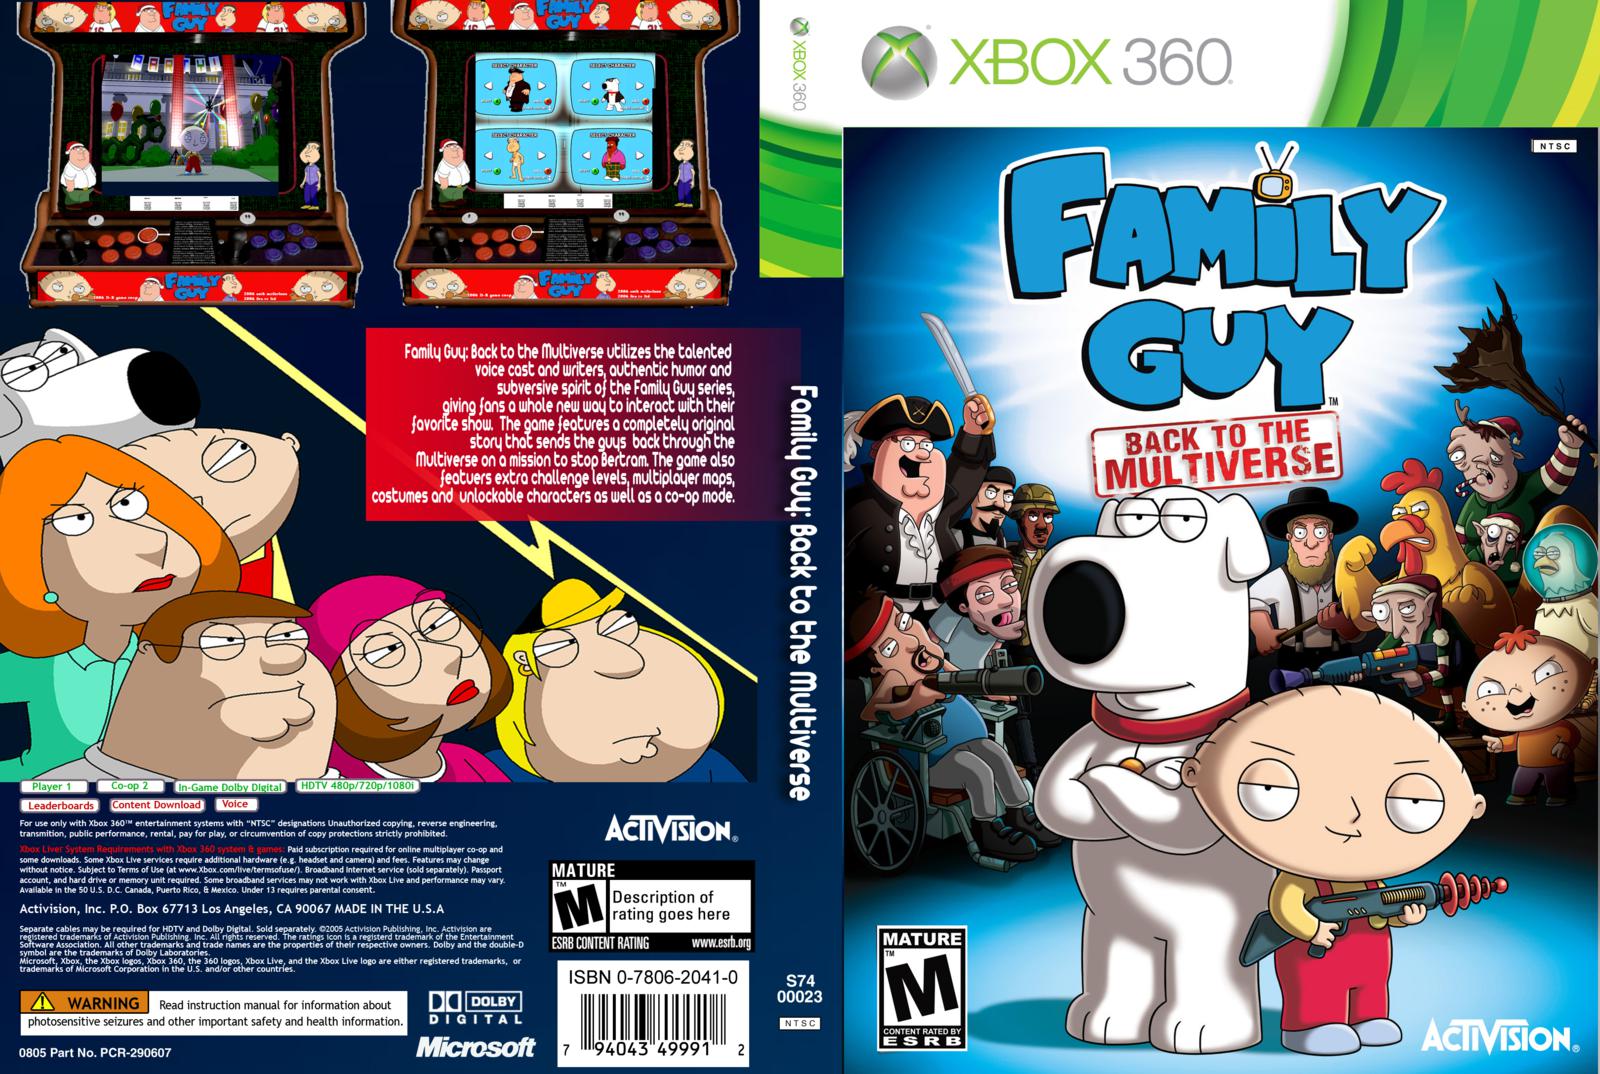 Back to the multiverse. Family guy_ back to the Multiverse Xbox 360 обложка. Family guy Xbox 360. Family guy back to the Multiverse Xbox 360 Gameplay. Гриффины игра.